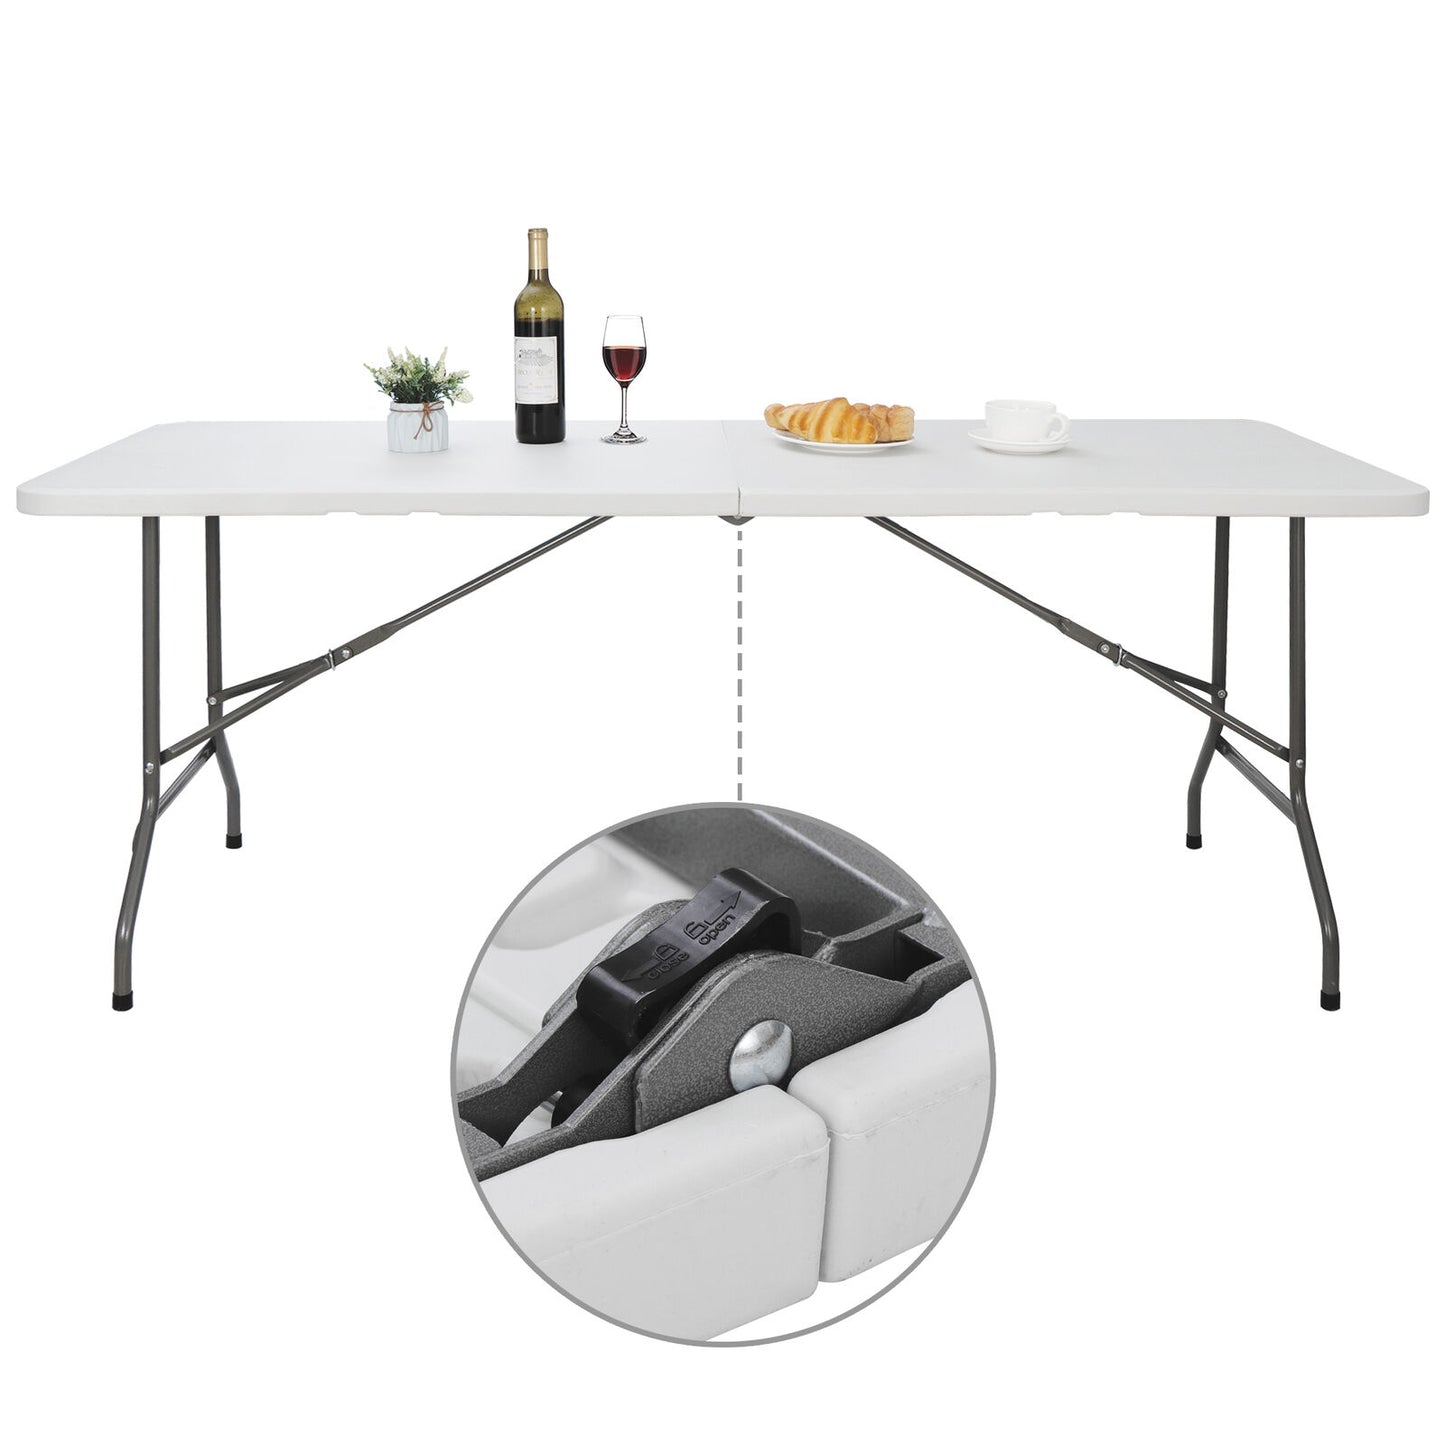 6ft Folding Table Portable Indoor Outdoor Picnic Party Camping Tables